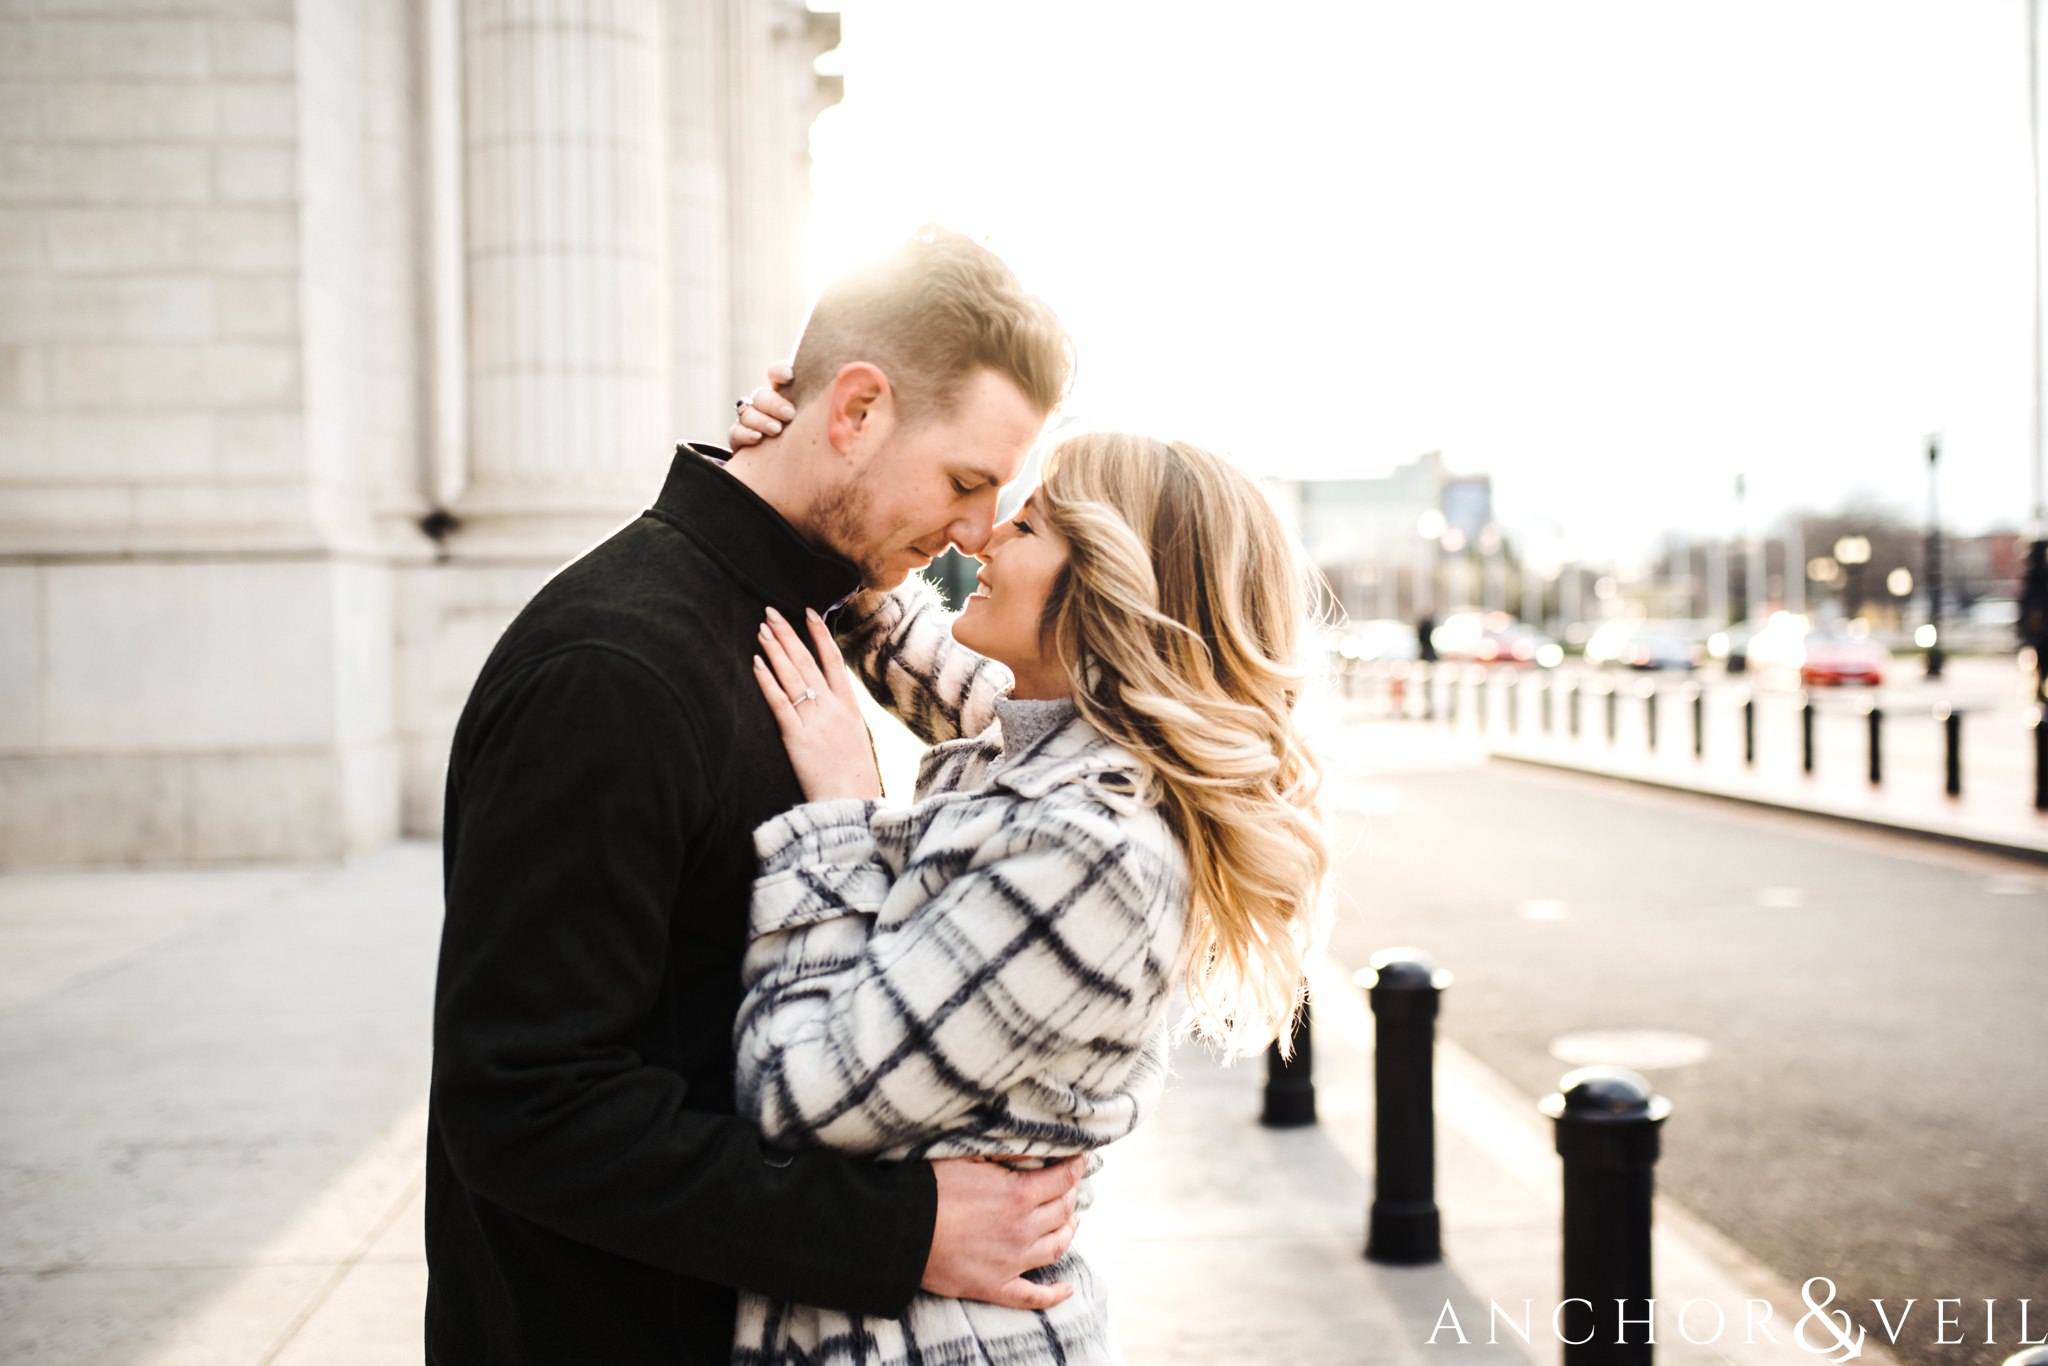 getting in close during their Scenic Washington DC Engagement Session